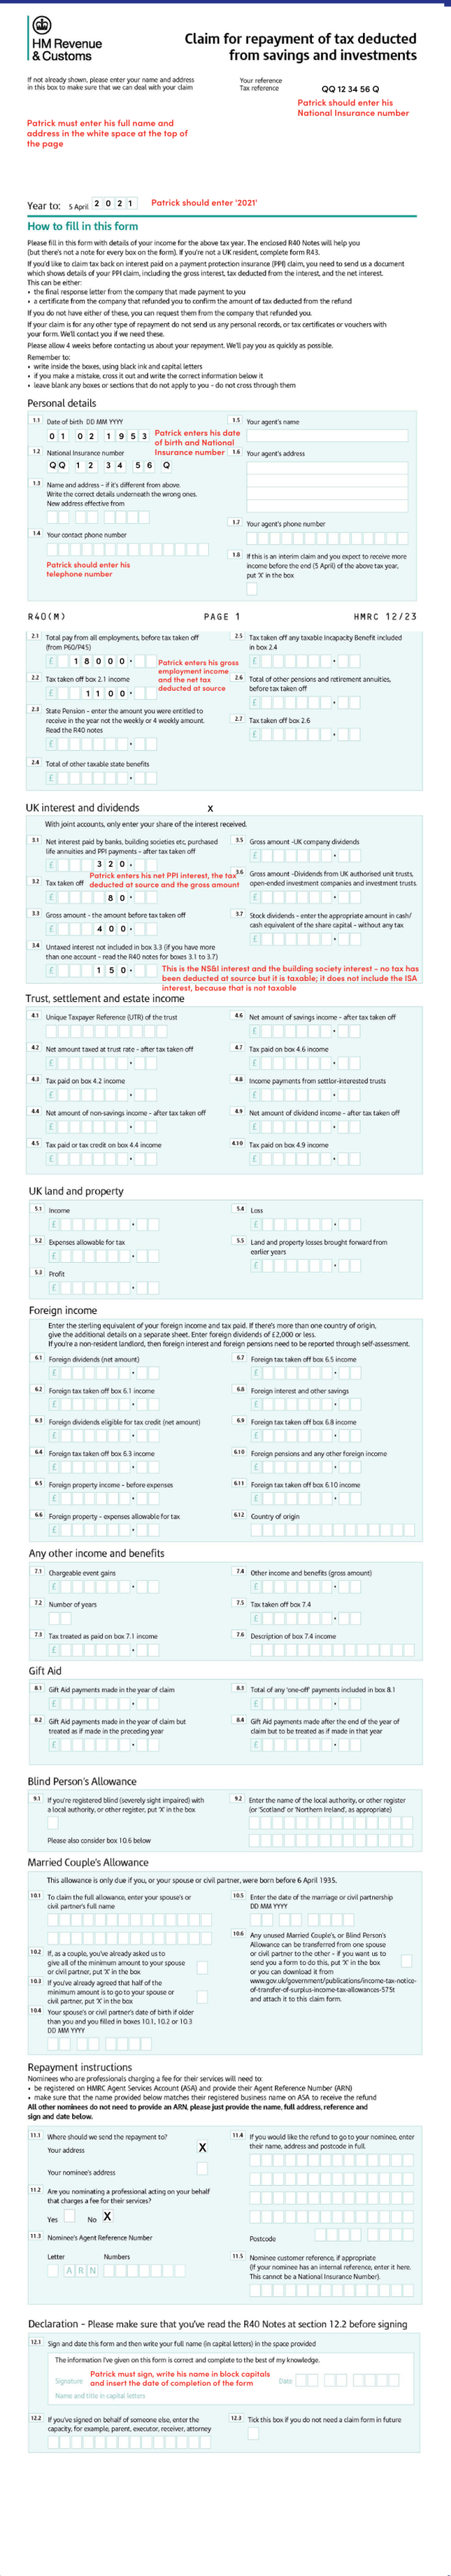 Example of an HM Revenue and Customs Form R40 (Claim for repayment of tax deducted from savings and investments). Markup on the form explains how the form should be completed in a fictional example of ‘Patrick’. 